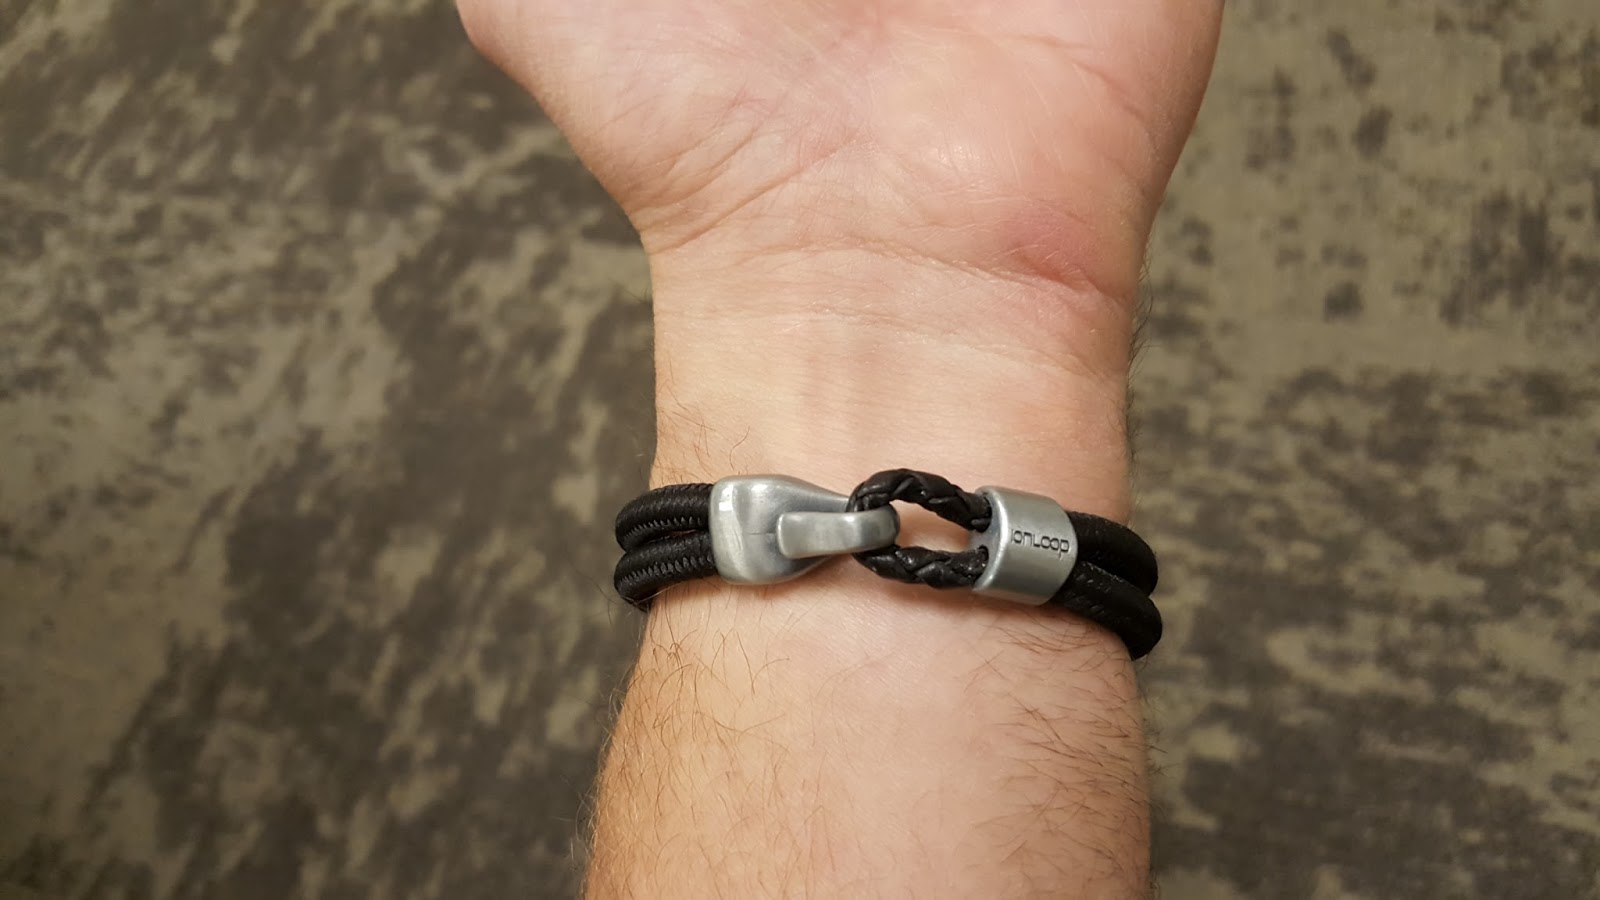 Running Without Injuries: IonLoop Dual Cord Bracelet and LEDX Slap